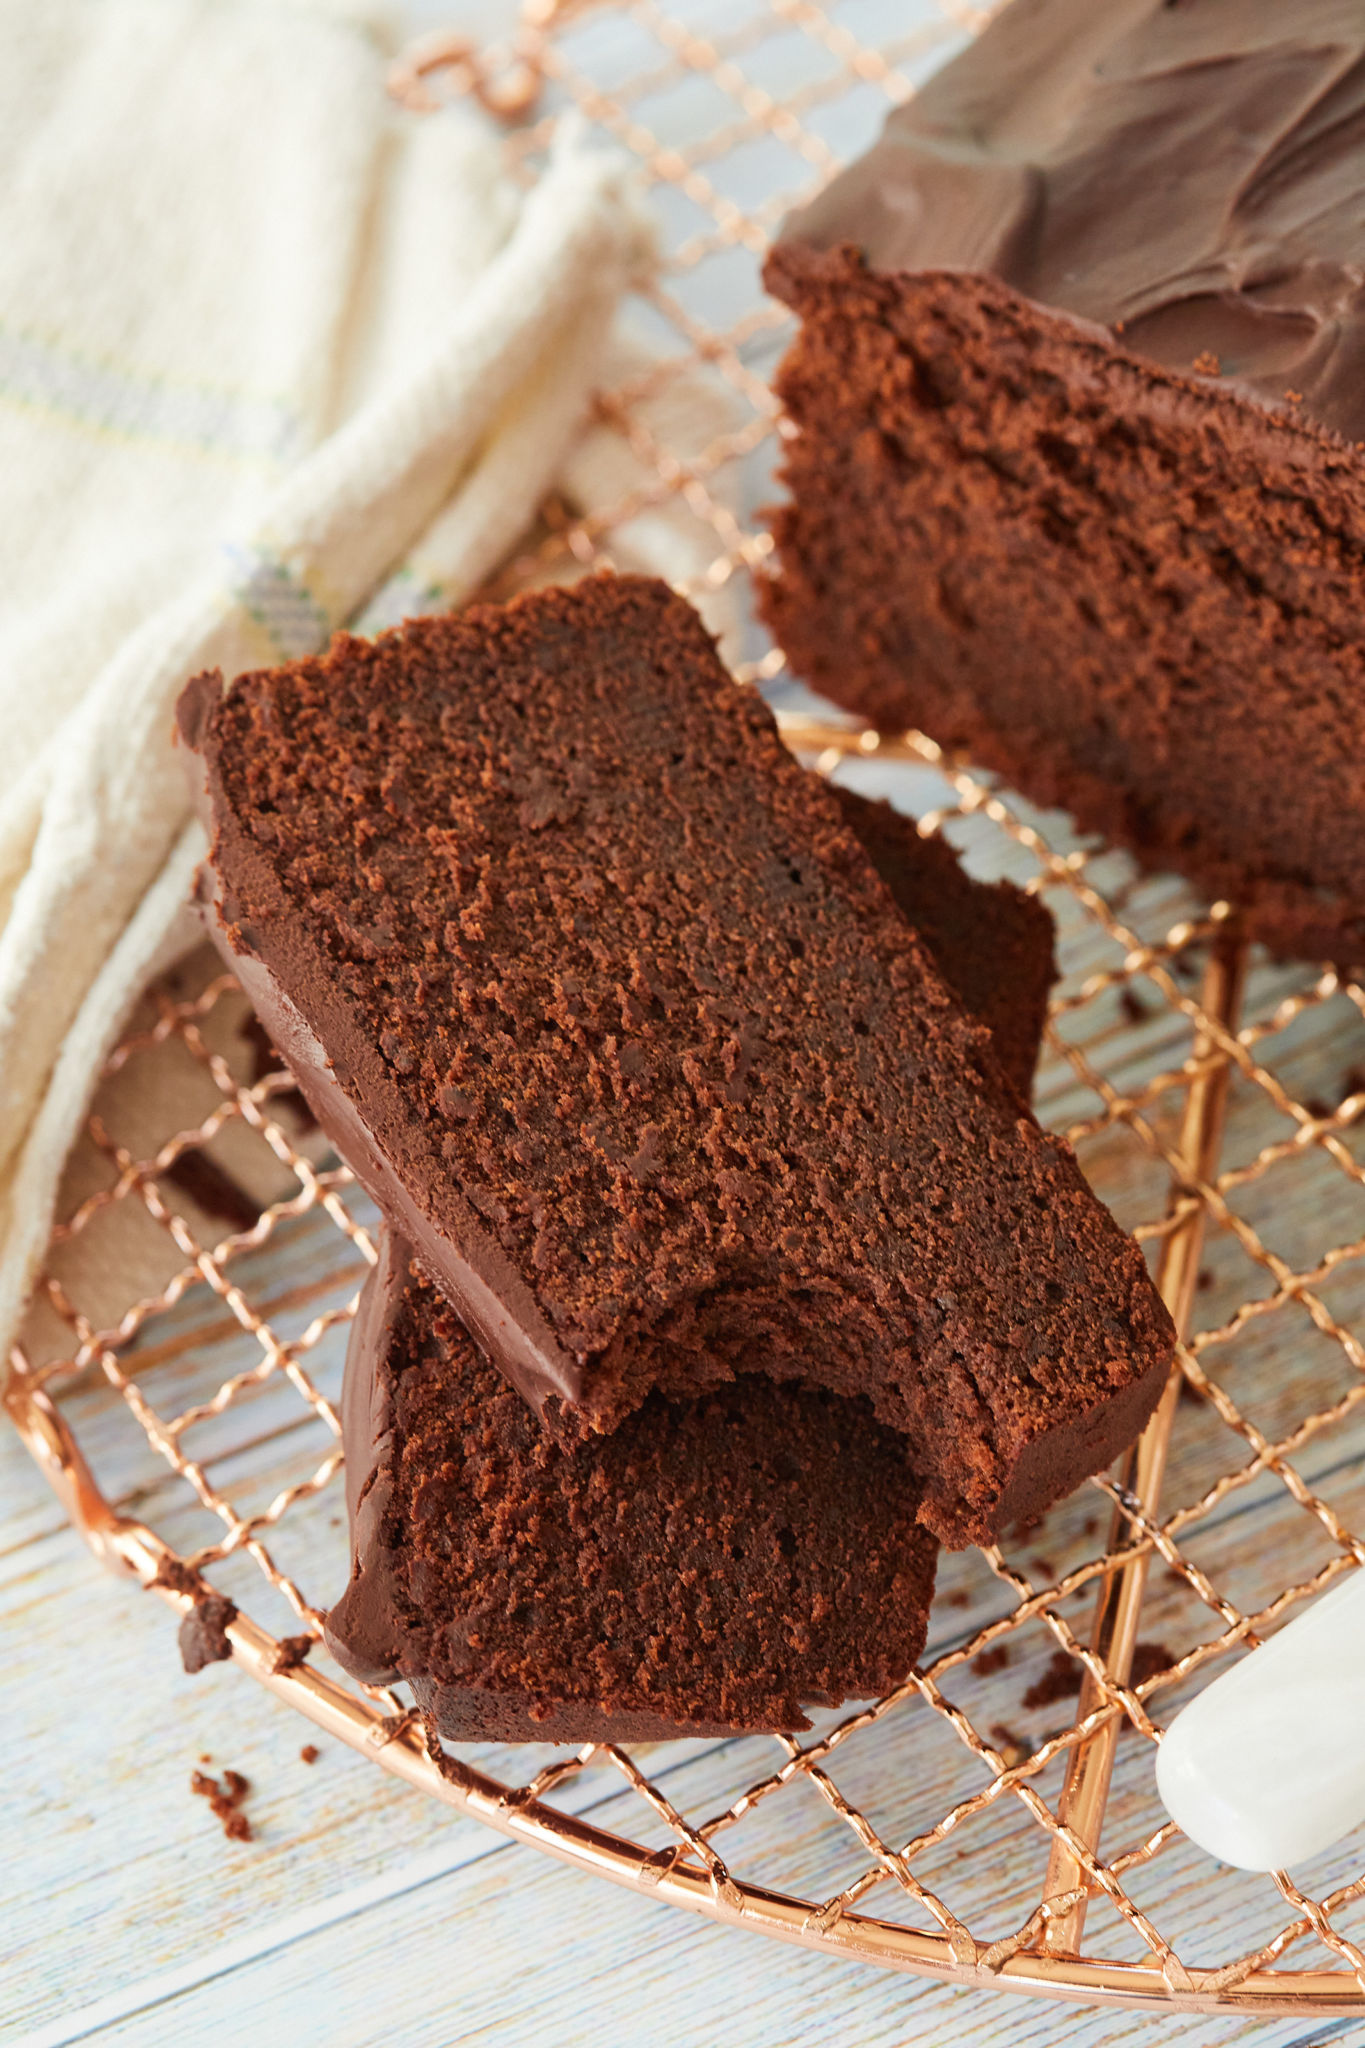 Slices of chocolate pound cake, showing the interior texture.